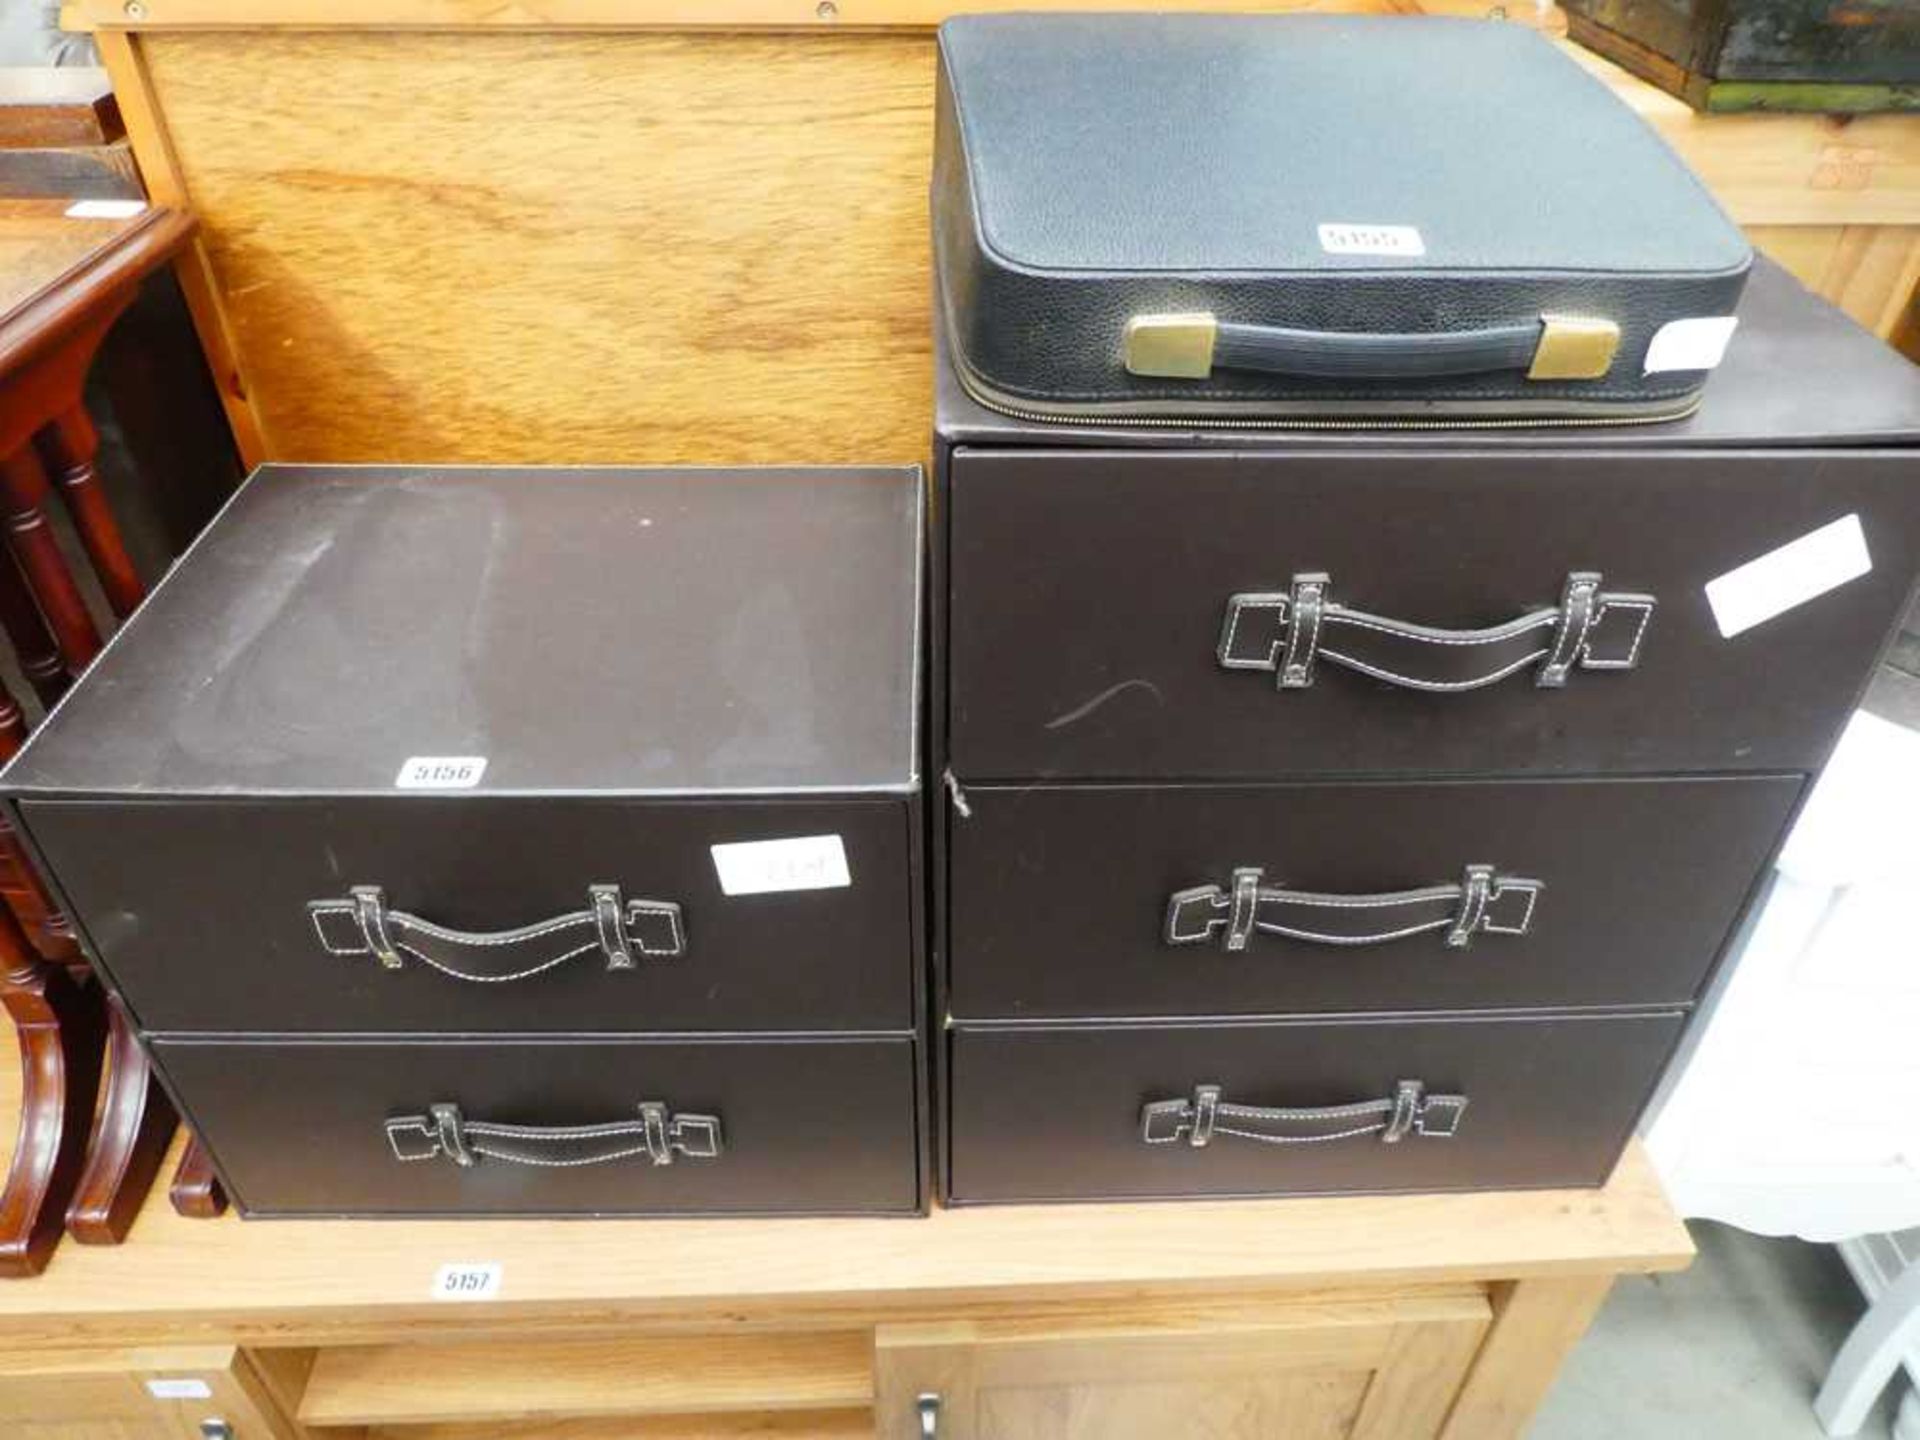 2 leather effect storage drawers